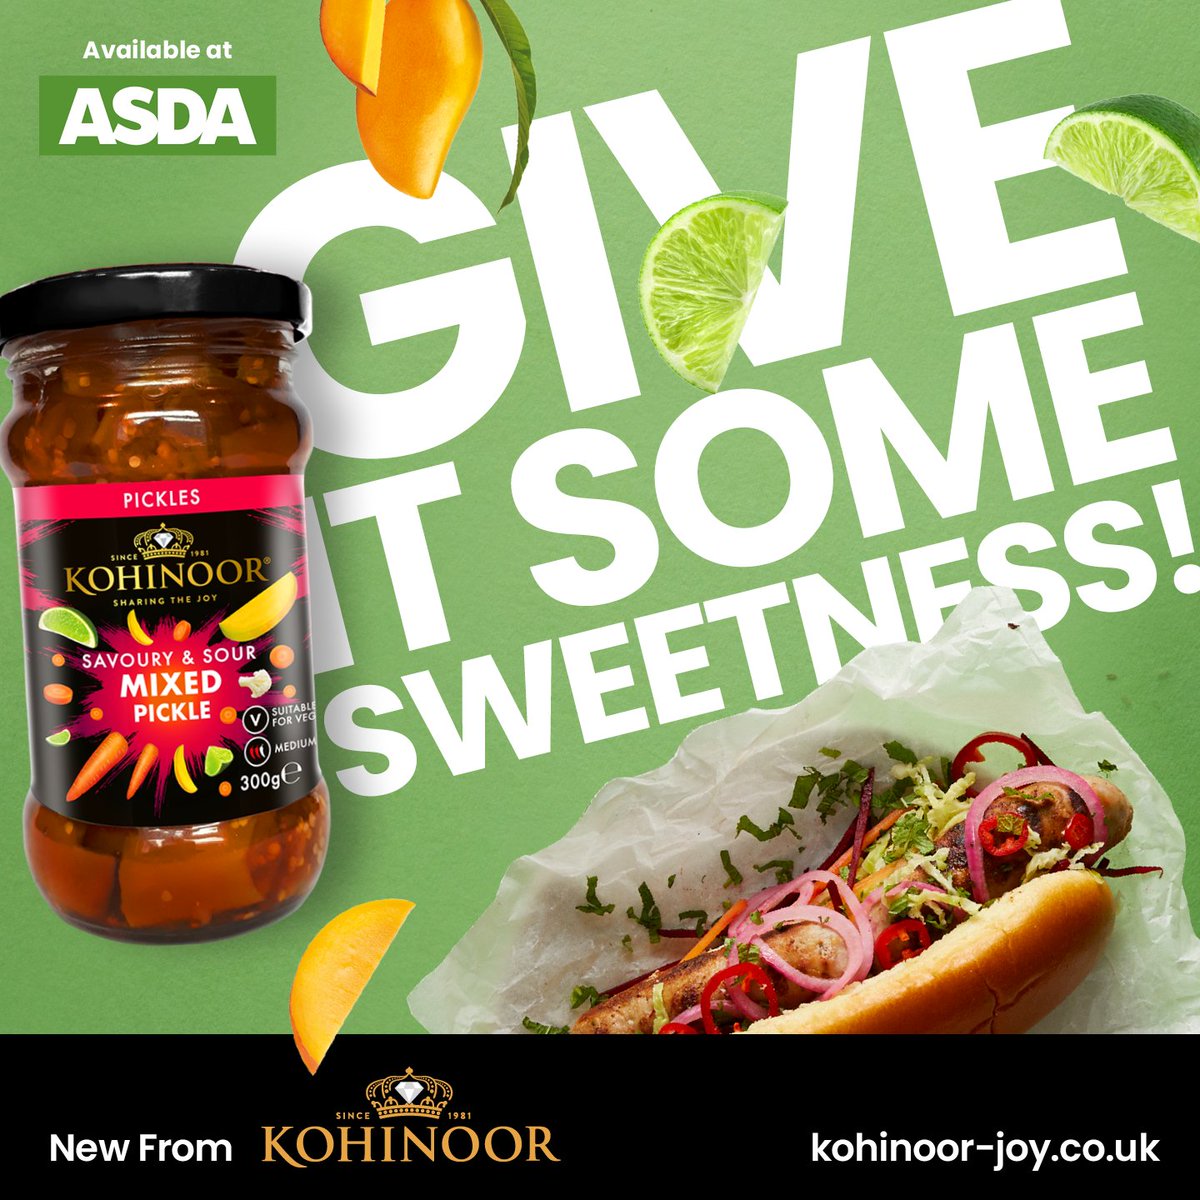 We've got you covered if you like it sweet, try out New Authentic Vegan Mixed Pickles! Now available at Asda! See link rb.gy/sx9gc4